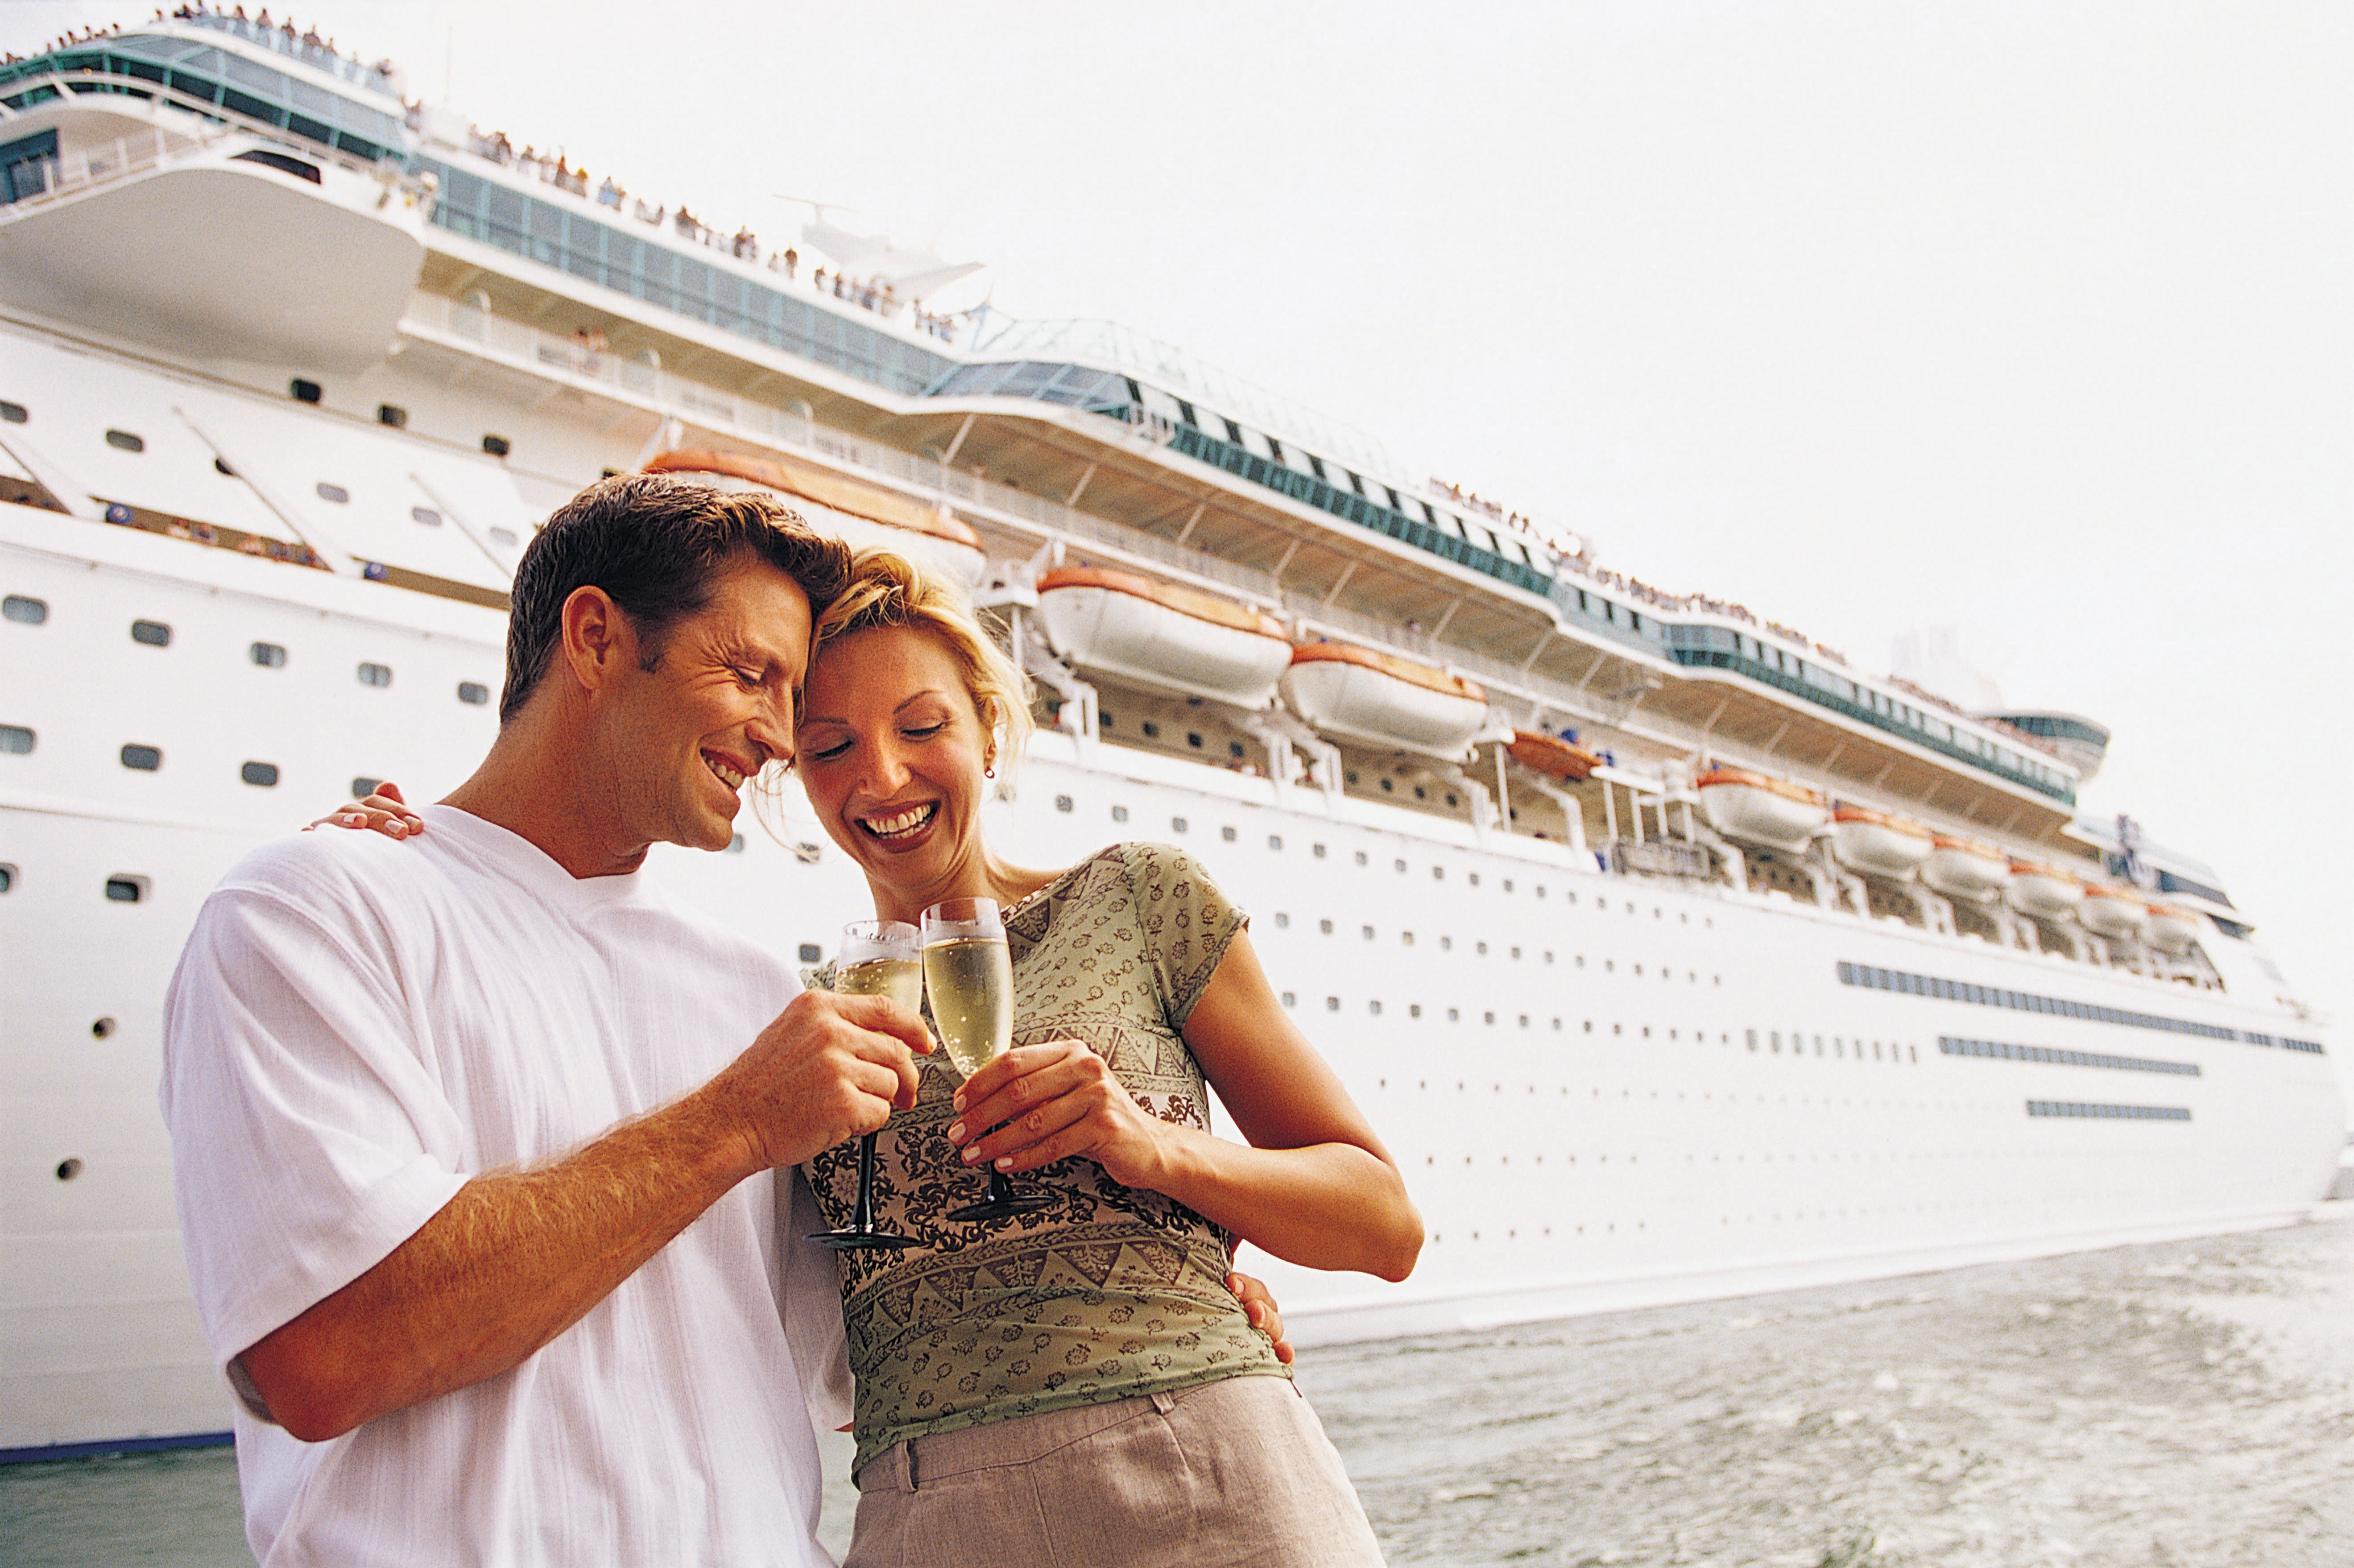 What To Expect From Onboard Shopping Now That Cruise Trips Are Back